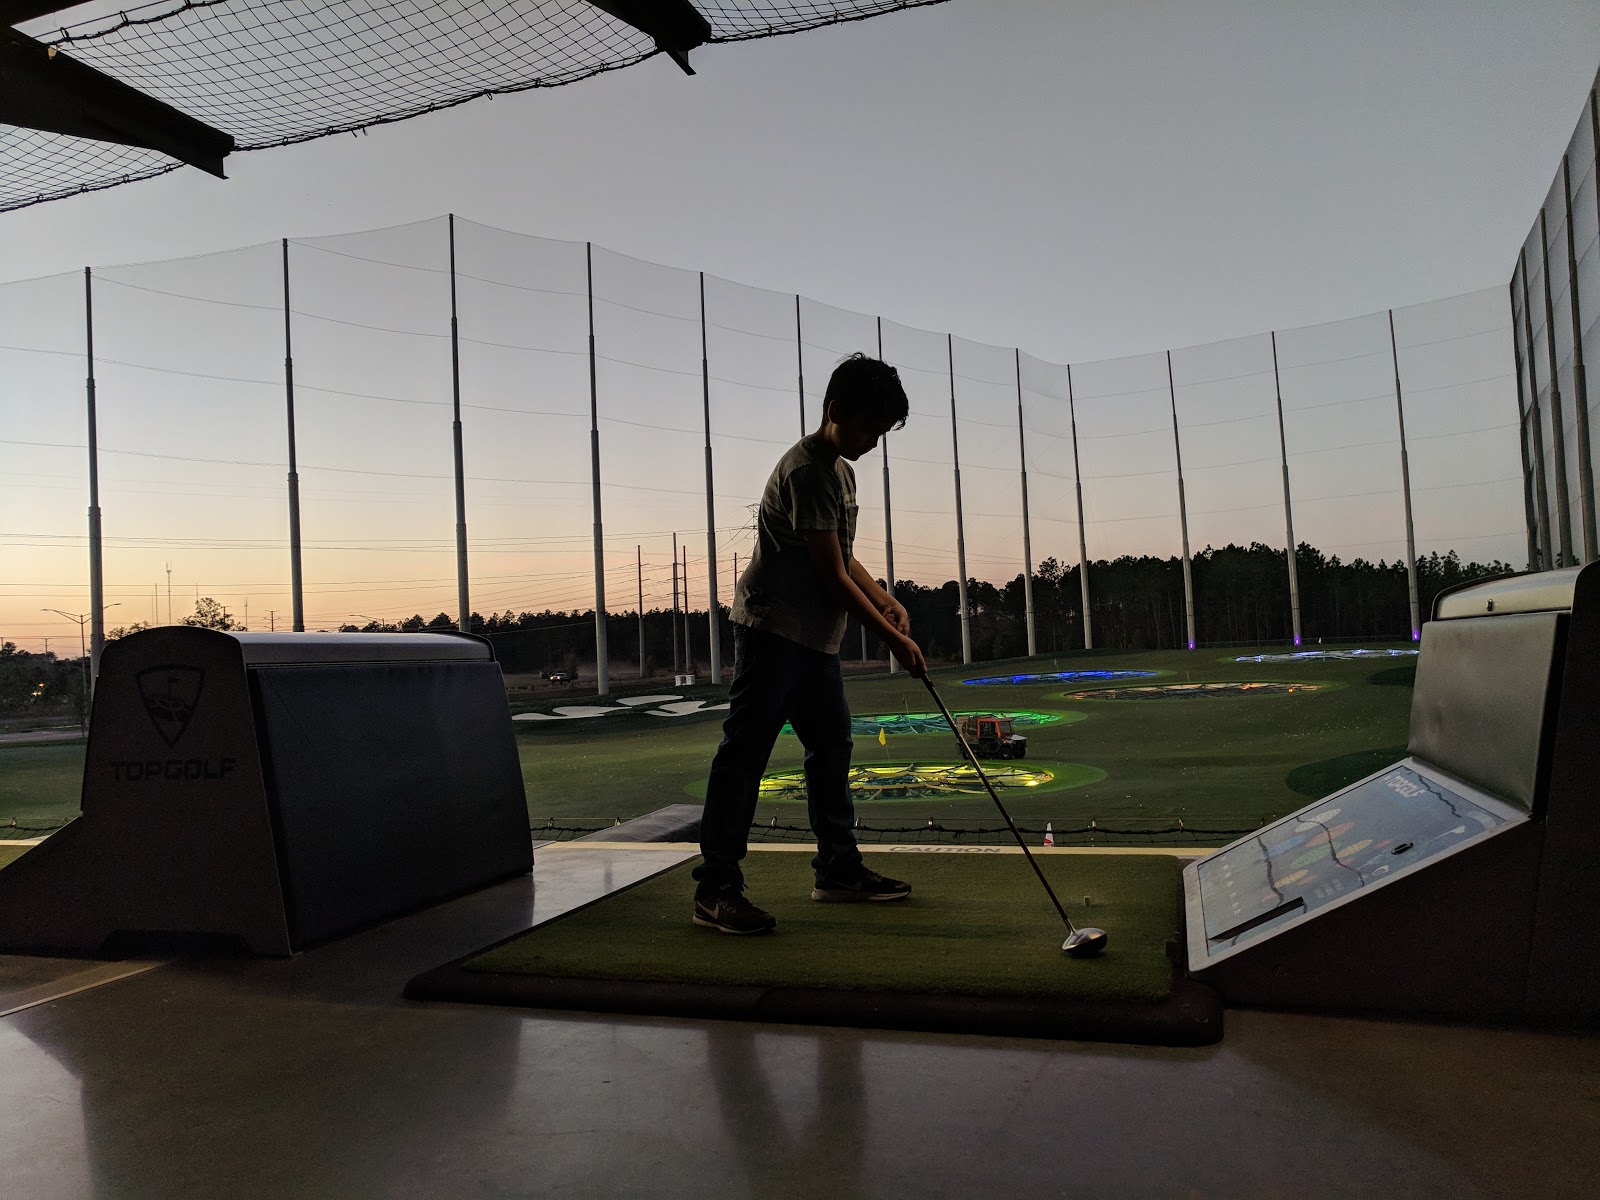 Top Golf - One of the most fun things I've ever done!